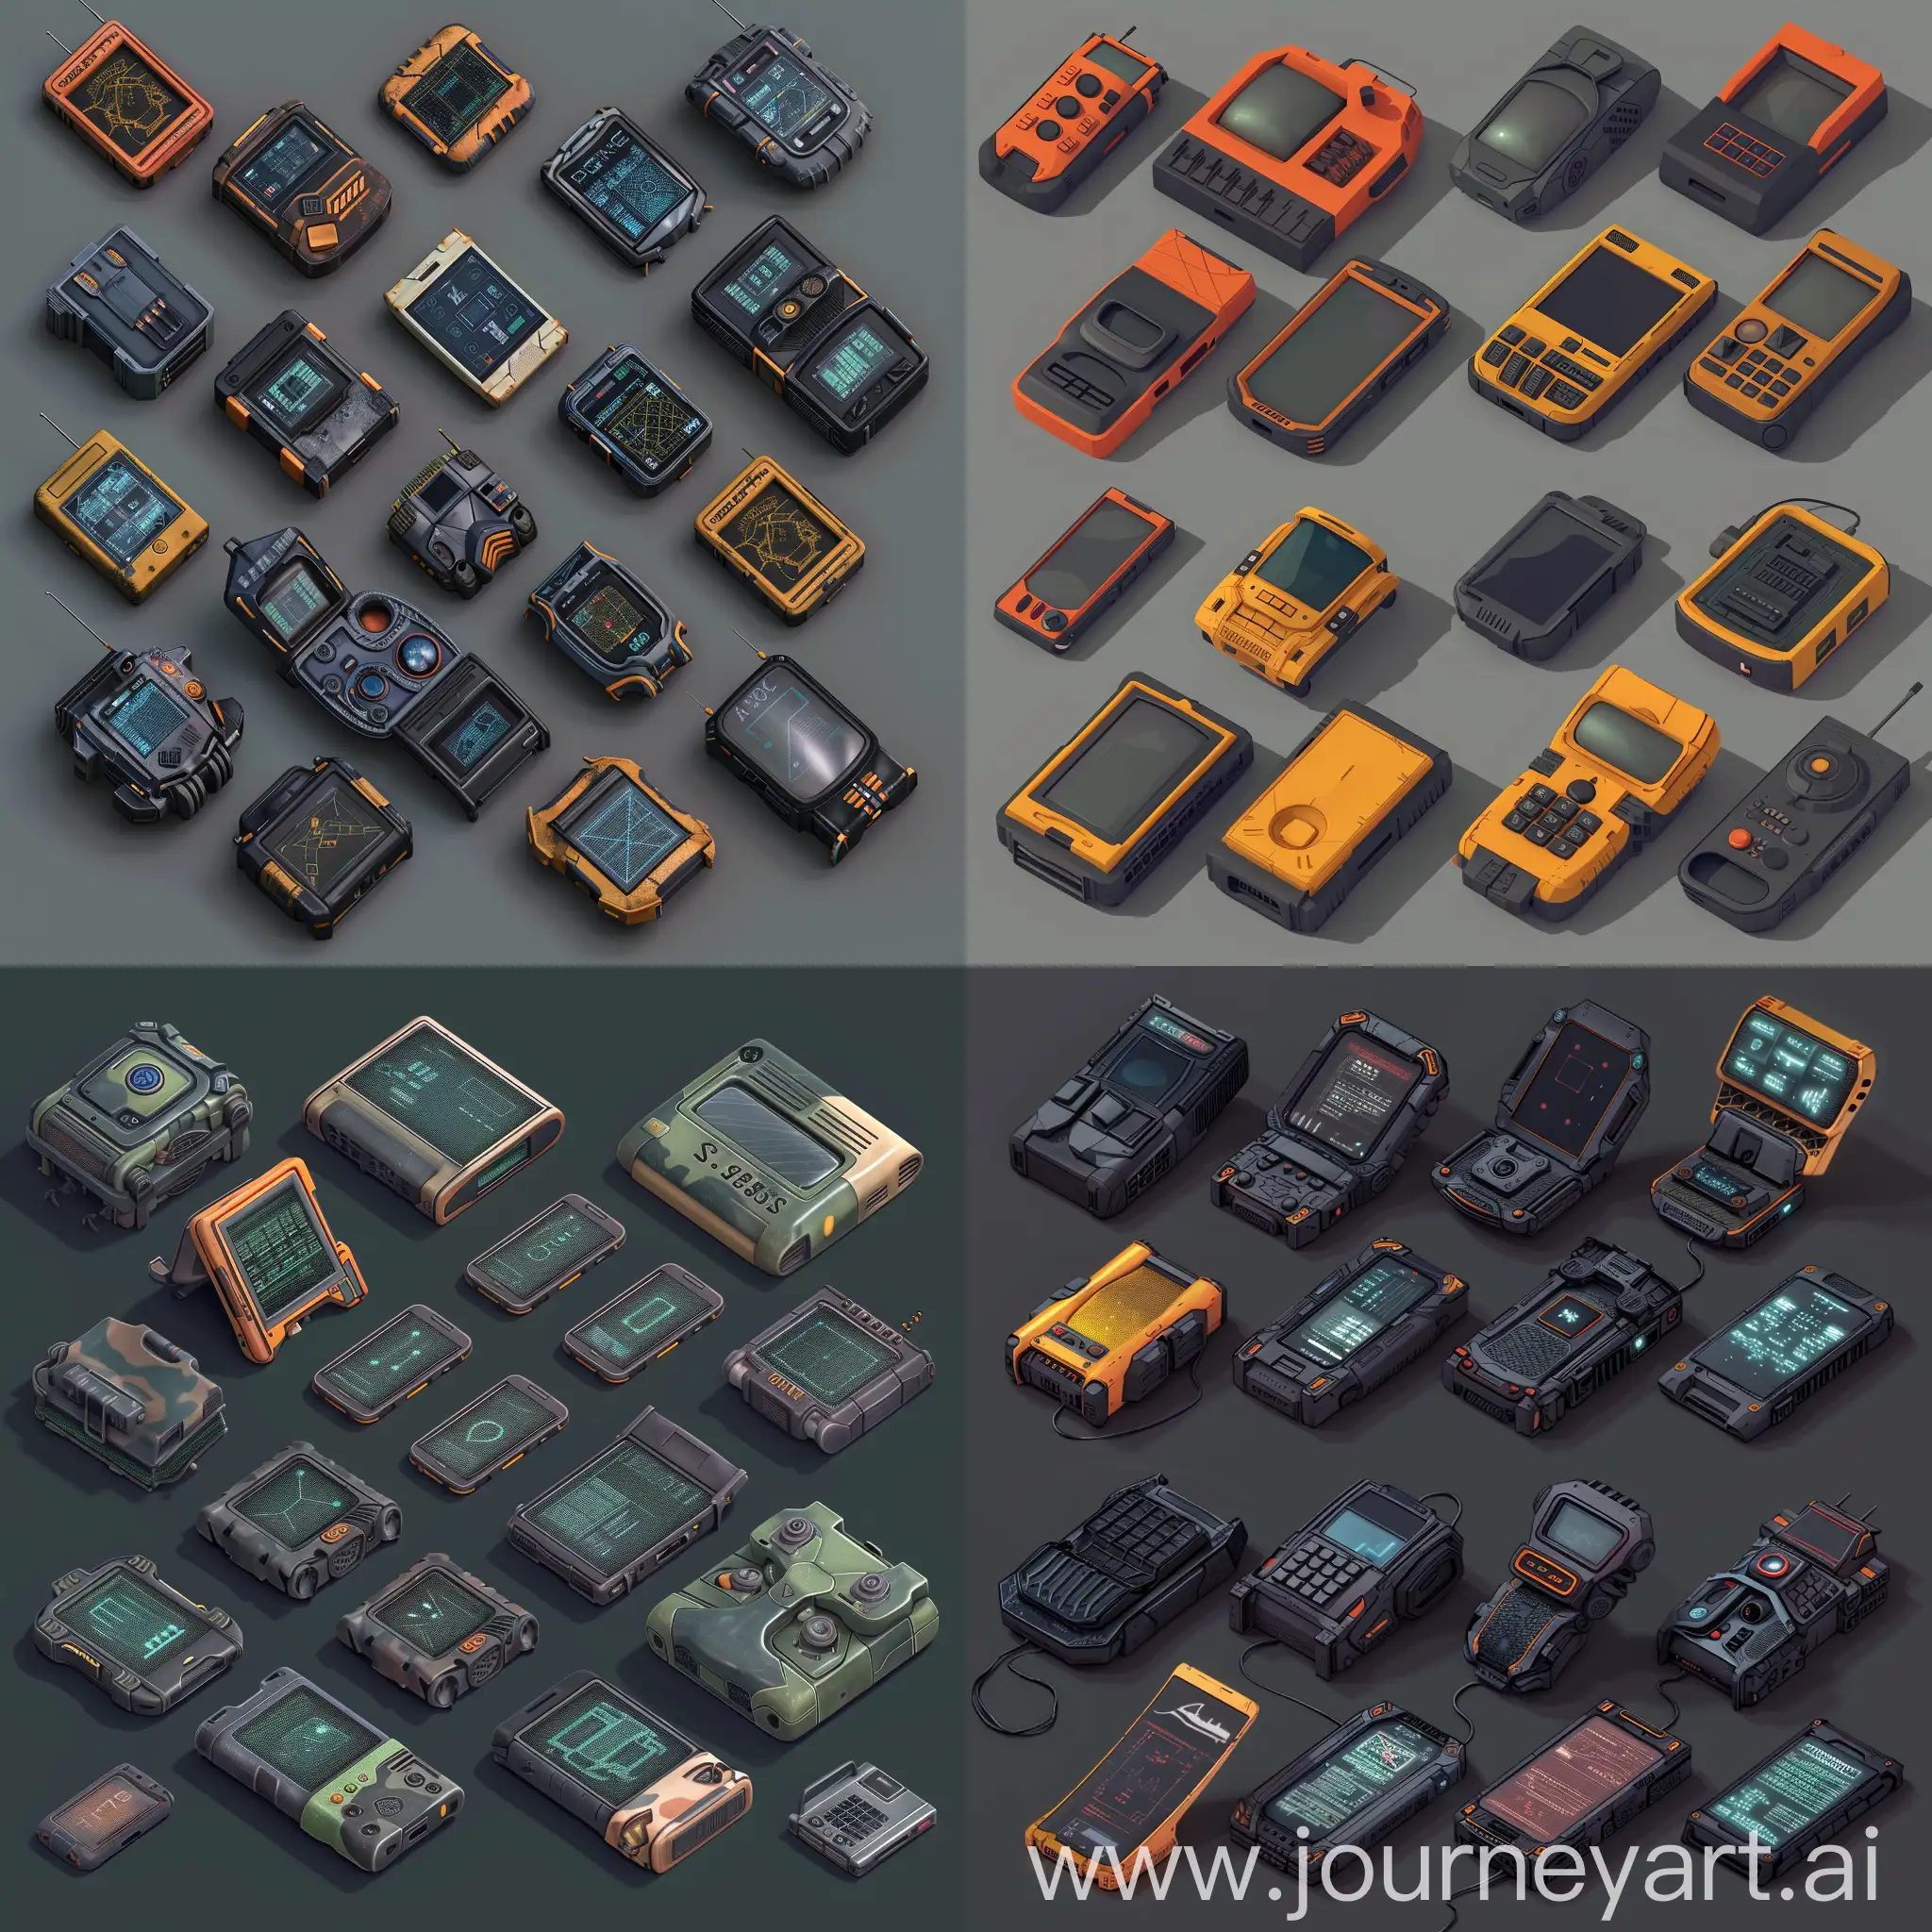 Isometric-PDA-Device-Set-in-Stalker-Game-Style-Rendered-with-Unreal-Engine-5